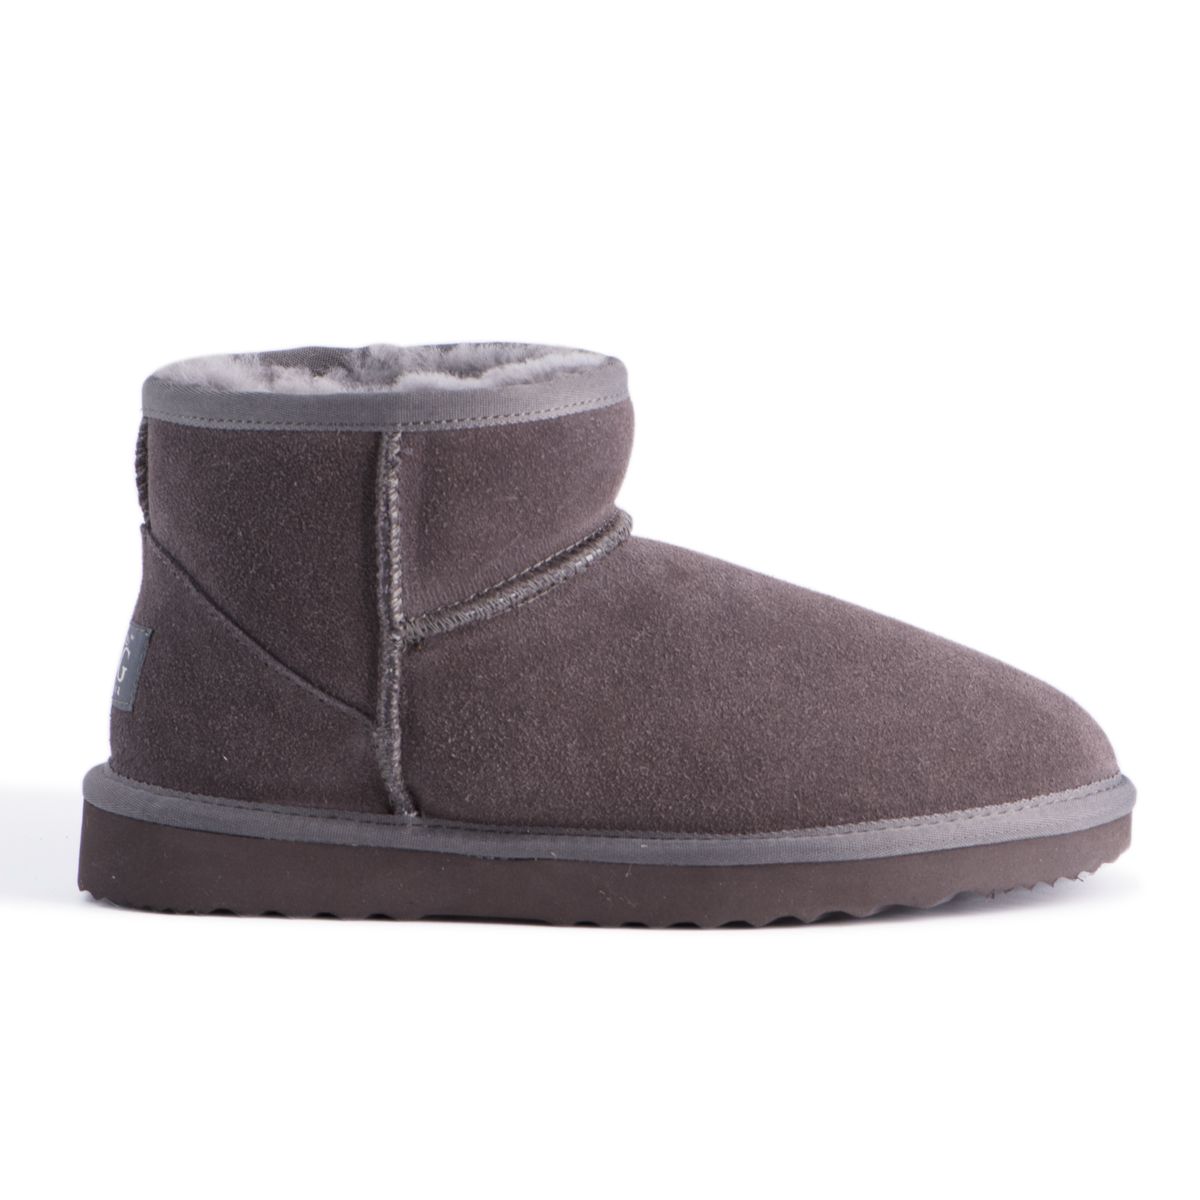 DETAILS


Unique fully moulded insole with support - all sheepskin lined footbed - extremely comfortable
Unisex superior sheepskin boot 

Full leather Suede upper - Water Resistance

Soft premium genuine Australian Sheepskin wool lining
Sustainably sourced and eco-friendly processed
Unisex value boots
Rubber High-density EVA blend outsole - making it lighter,softer and more durable
Double stitching and reinforced heel
Sheepskin breathes allowing feet to stay warm in winter and cool in summer
100% brand new and high quality, comes in a branded box, suitable for gift